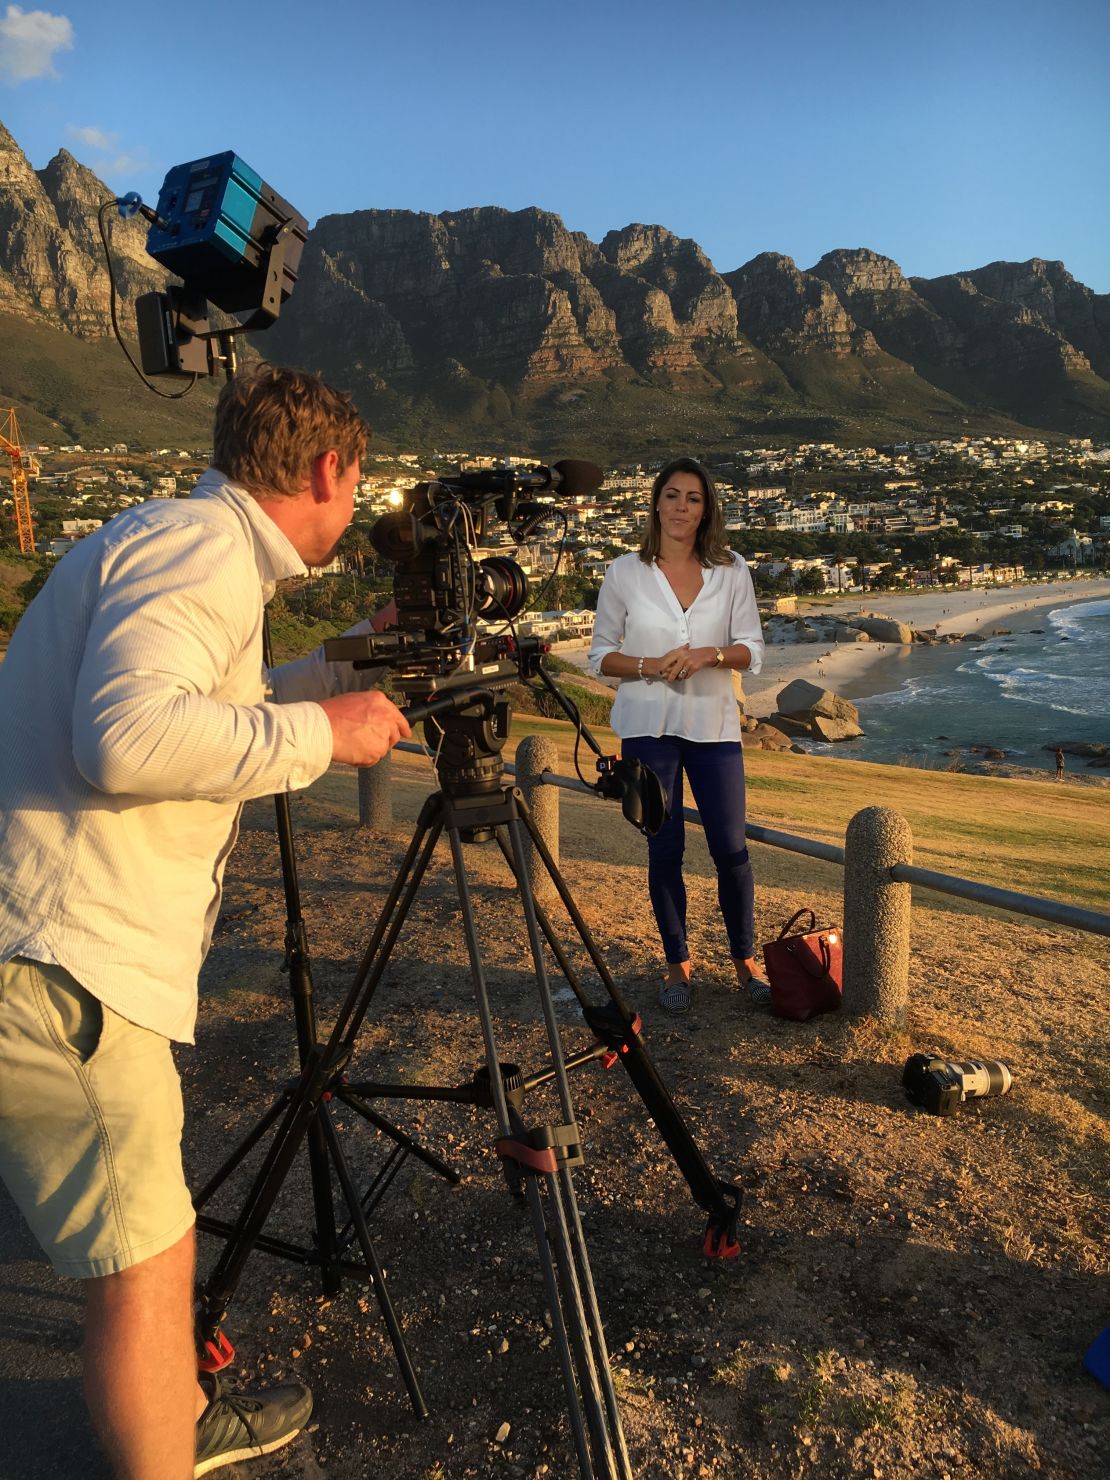 Aly Vance on location in Cape Town, South Africa for February's Winning Post show.